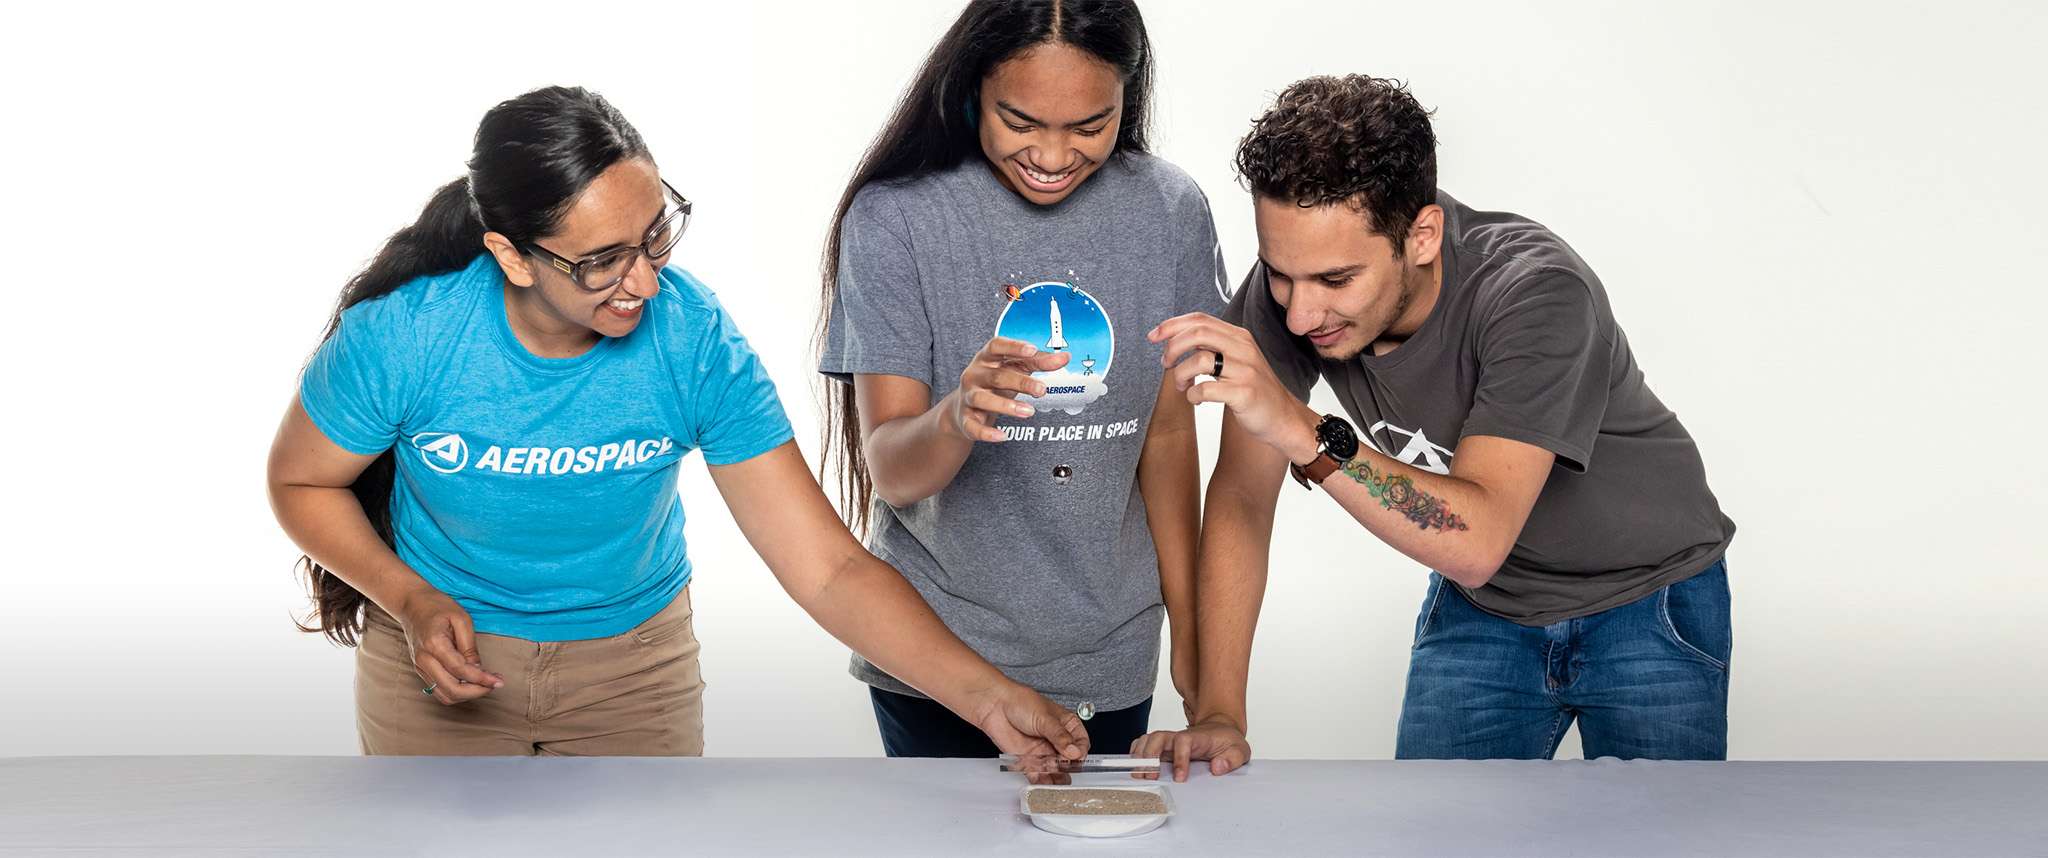 Aerospace’s AeroScholars program seeks out these promising students early on and provides them with resources and opportunities to pursue their dreams in the STEM fields.